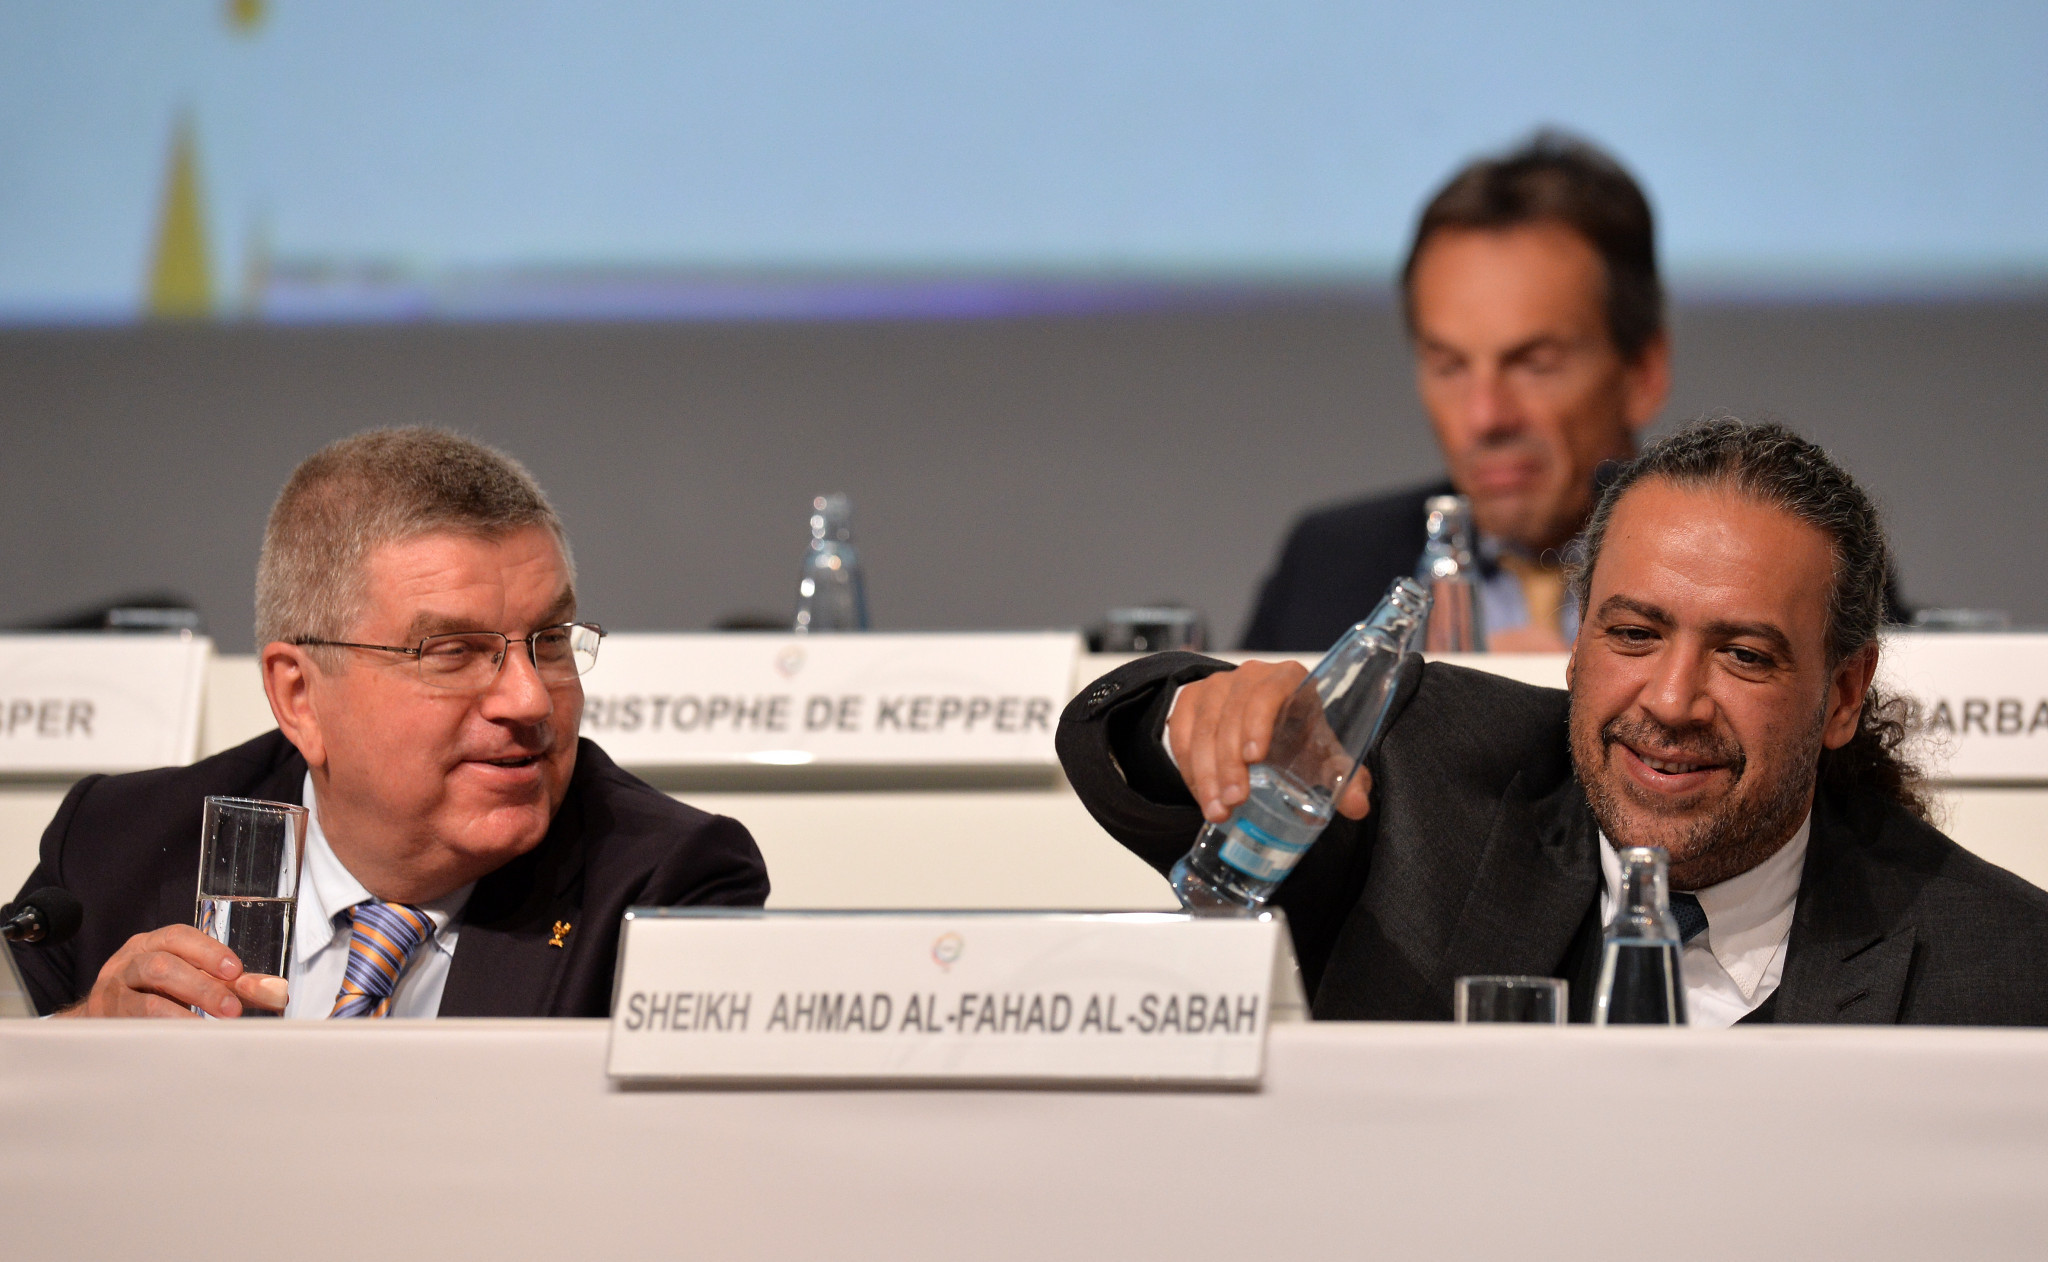 Thomas Bach, left, and Sheikh Ahmad Al-Fahad Al-Sabah during the ANOC General Assembly ©Getty Images